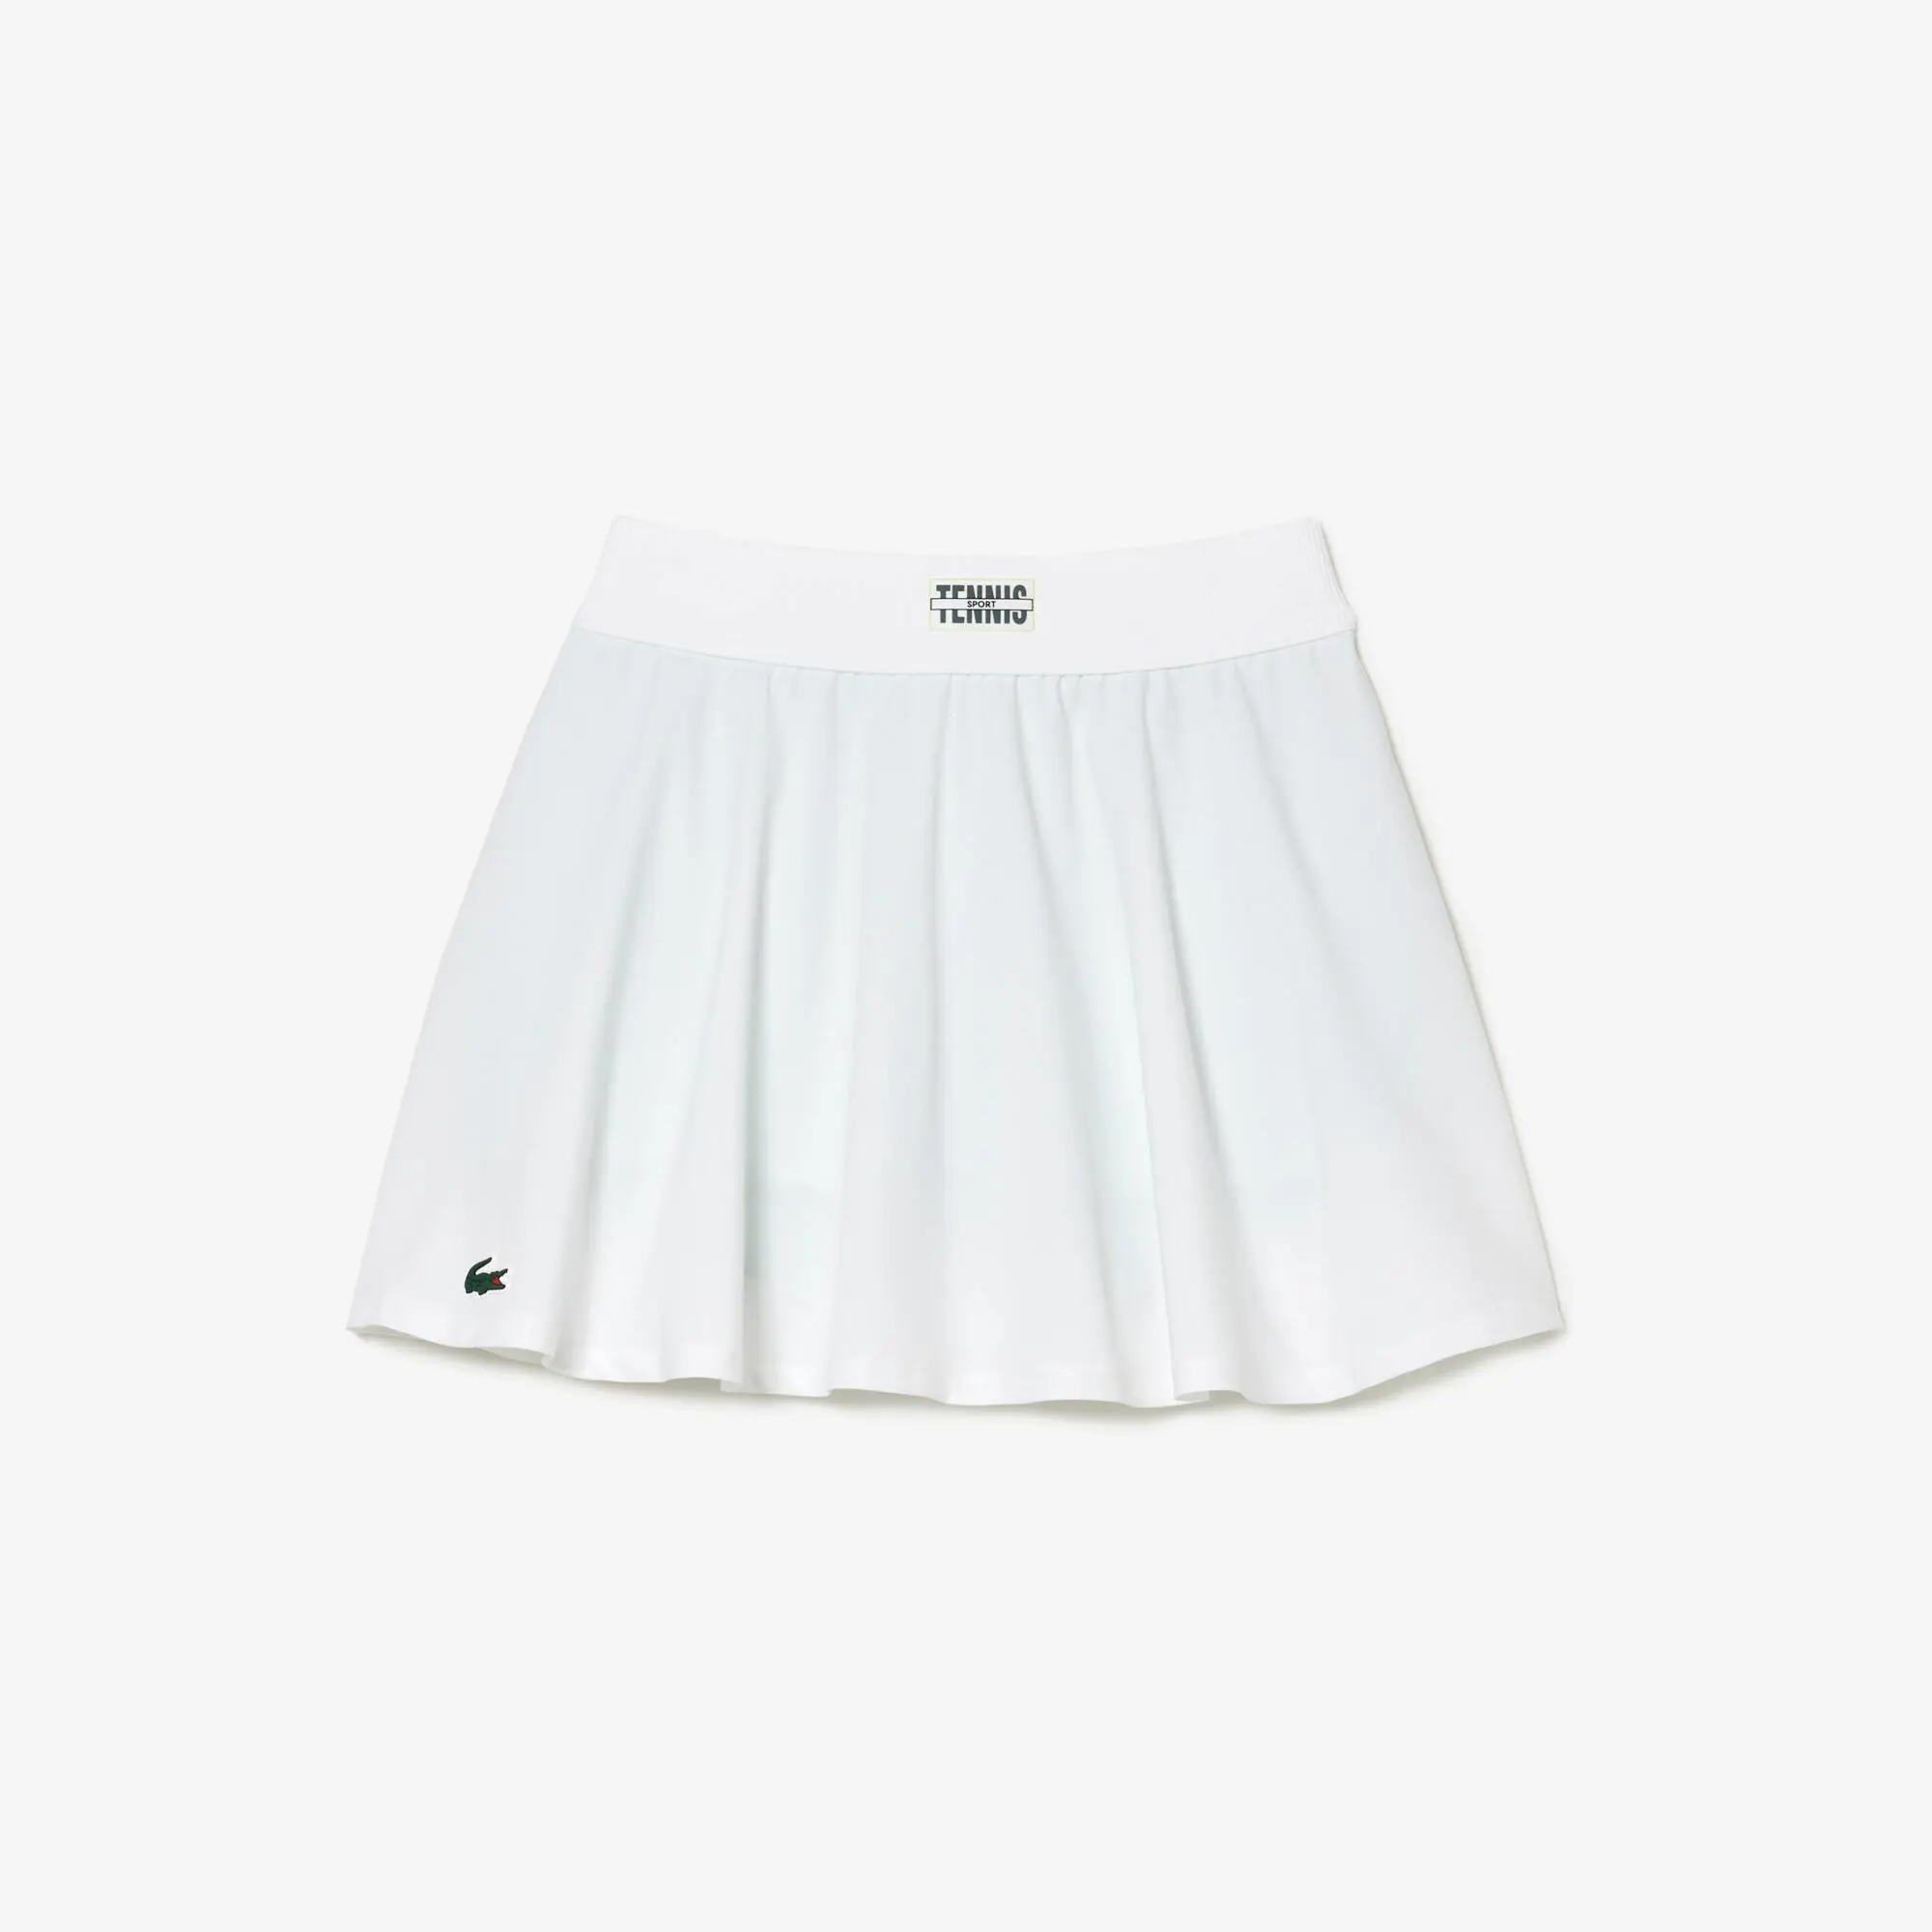 Lacoste Pleat Back Tennis Skirt with Contrast Shorts. 2